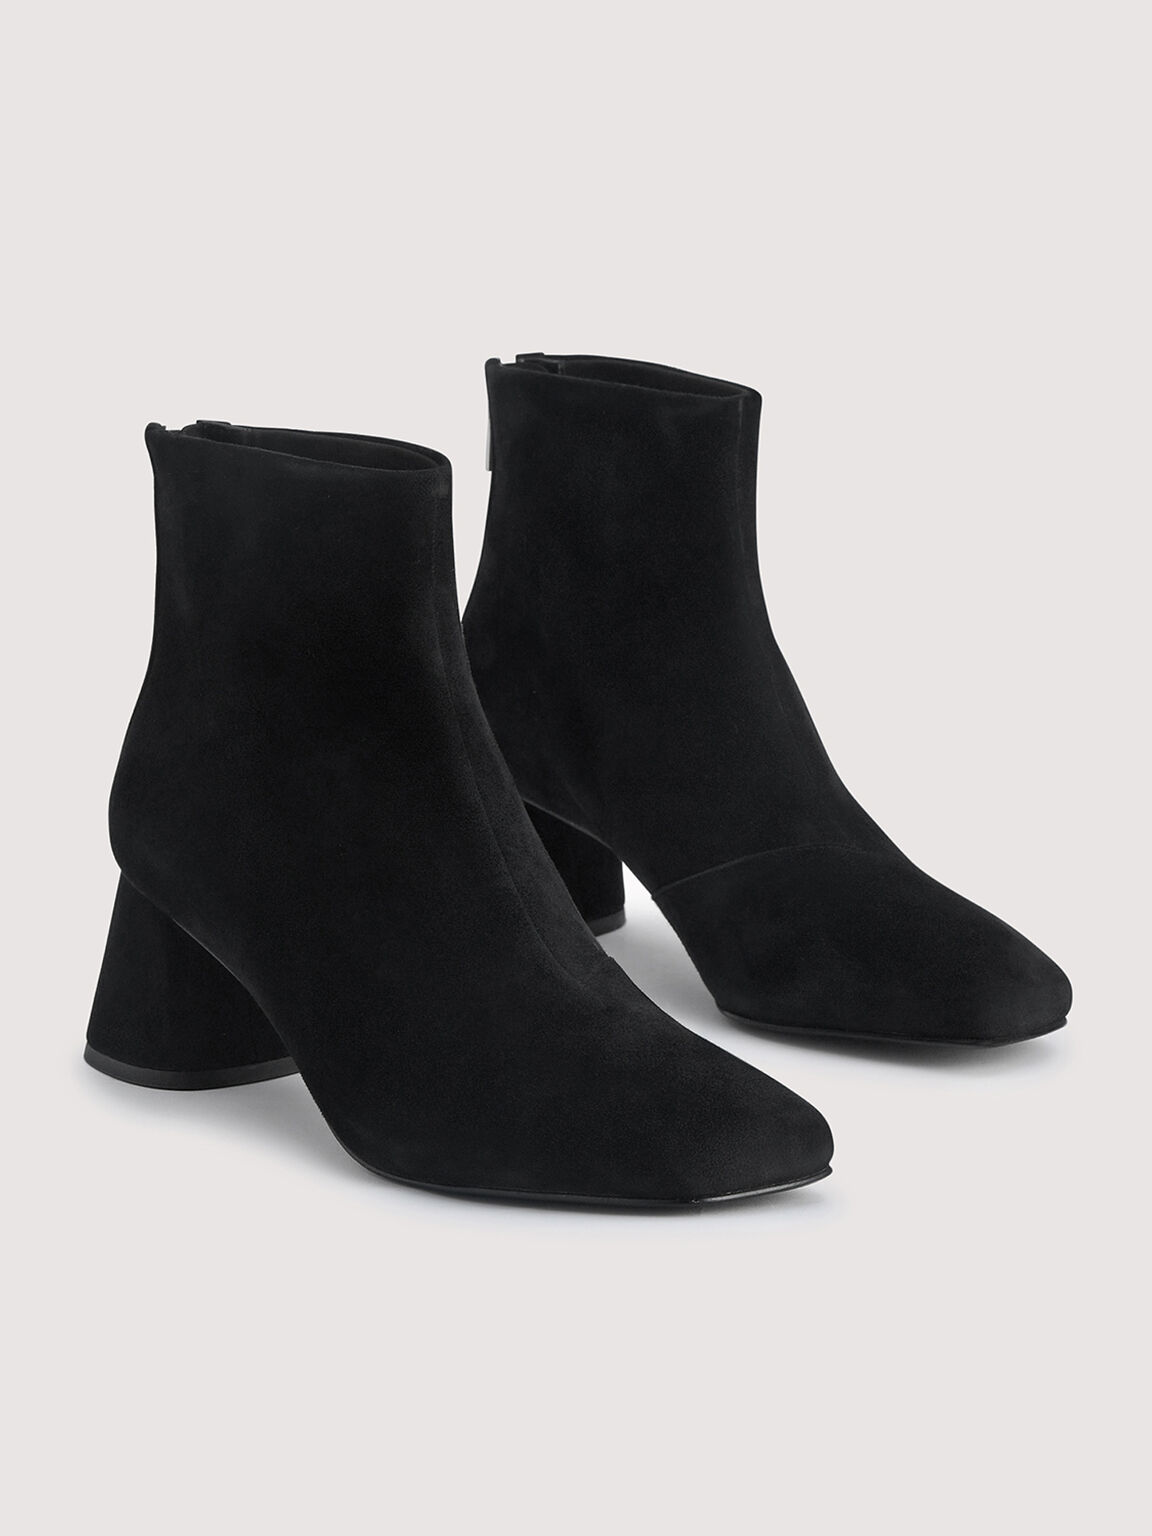 Suede Ankle Boots, Black